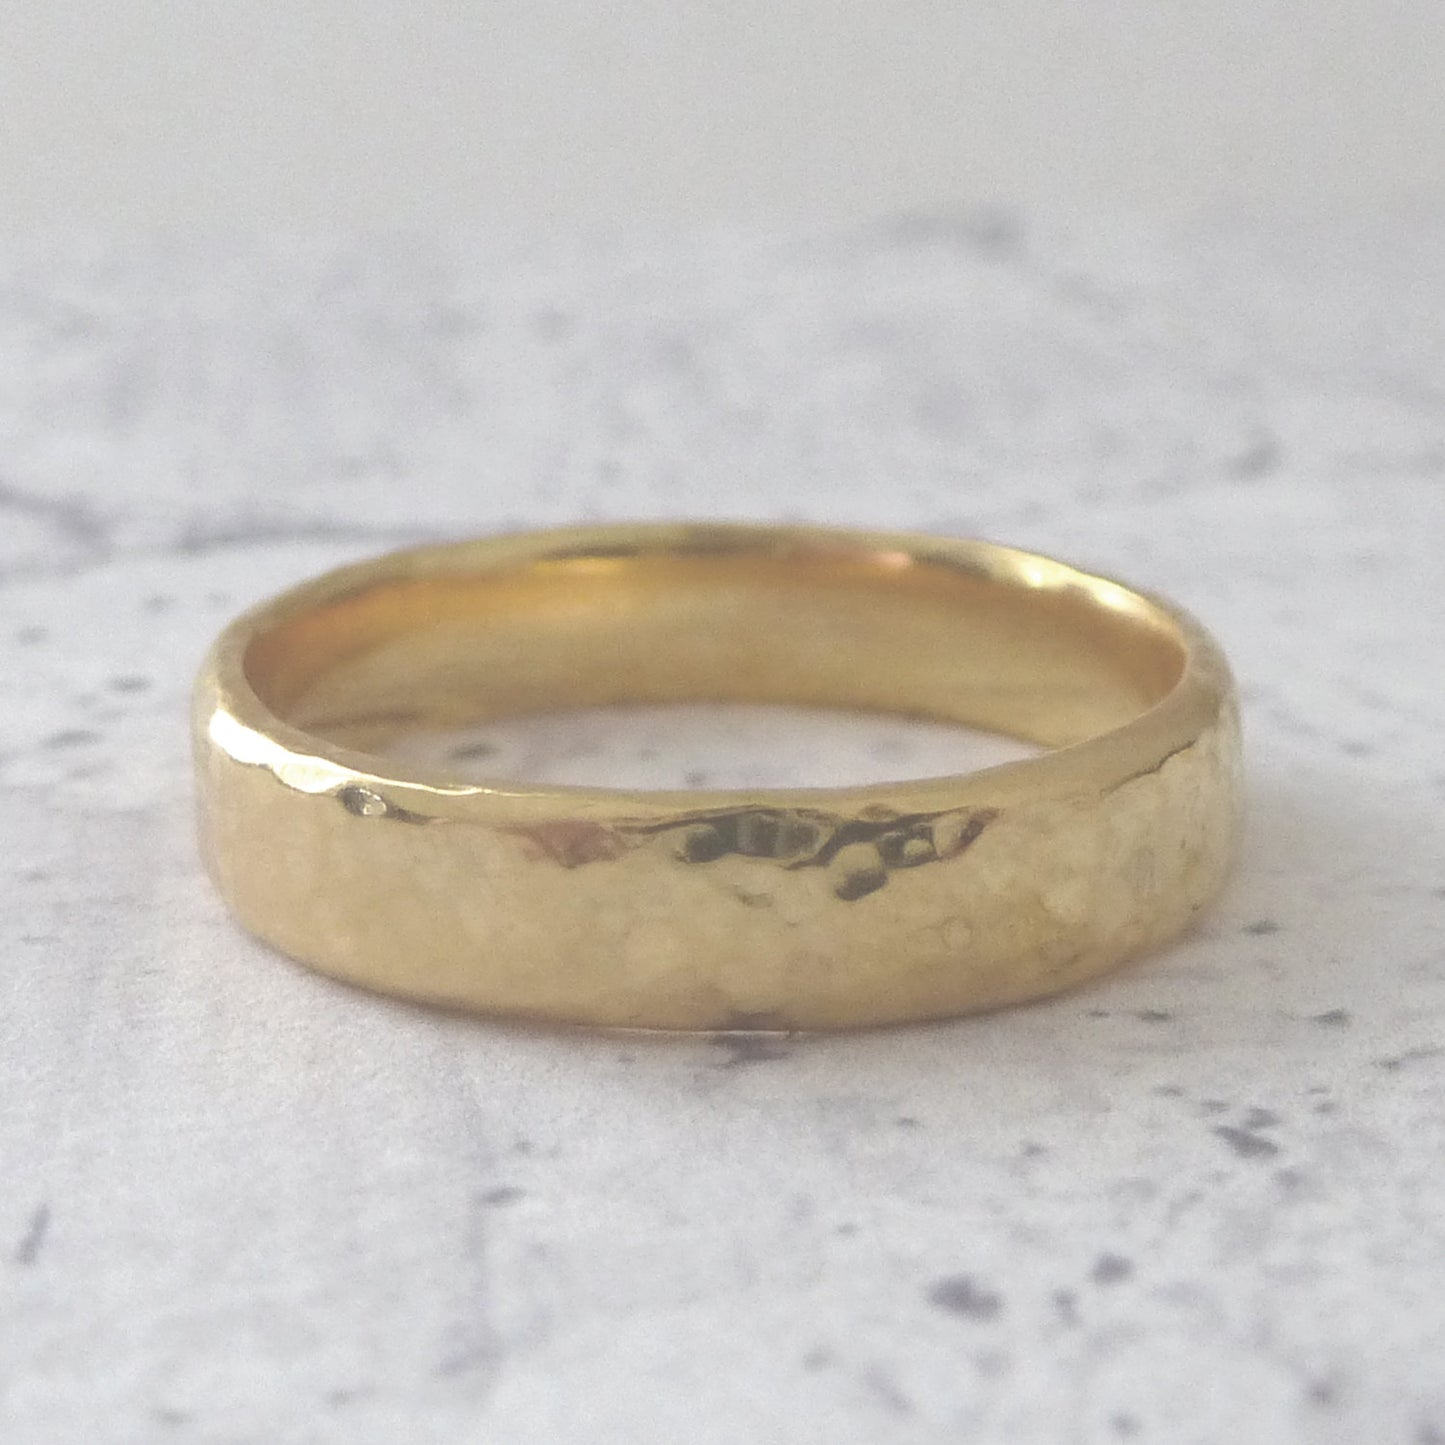 Slim Band Ring in 18ct Yellow Gold - 5mm - Hammered or Smooth